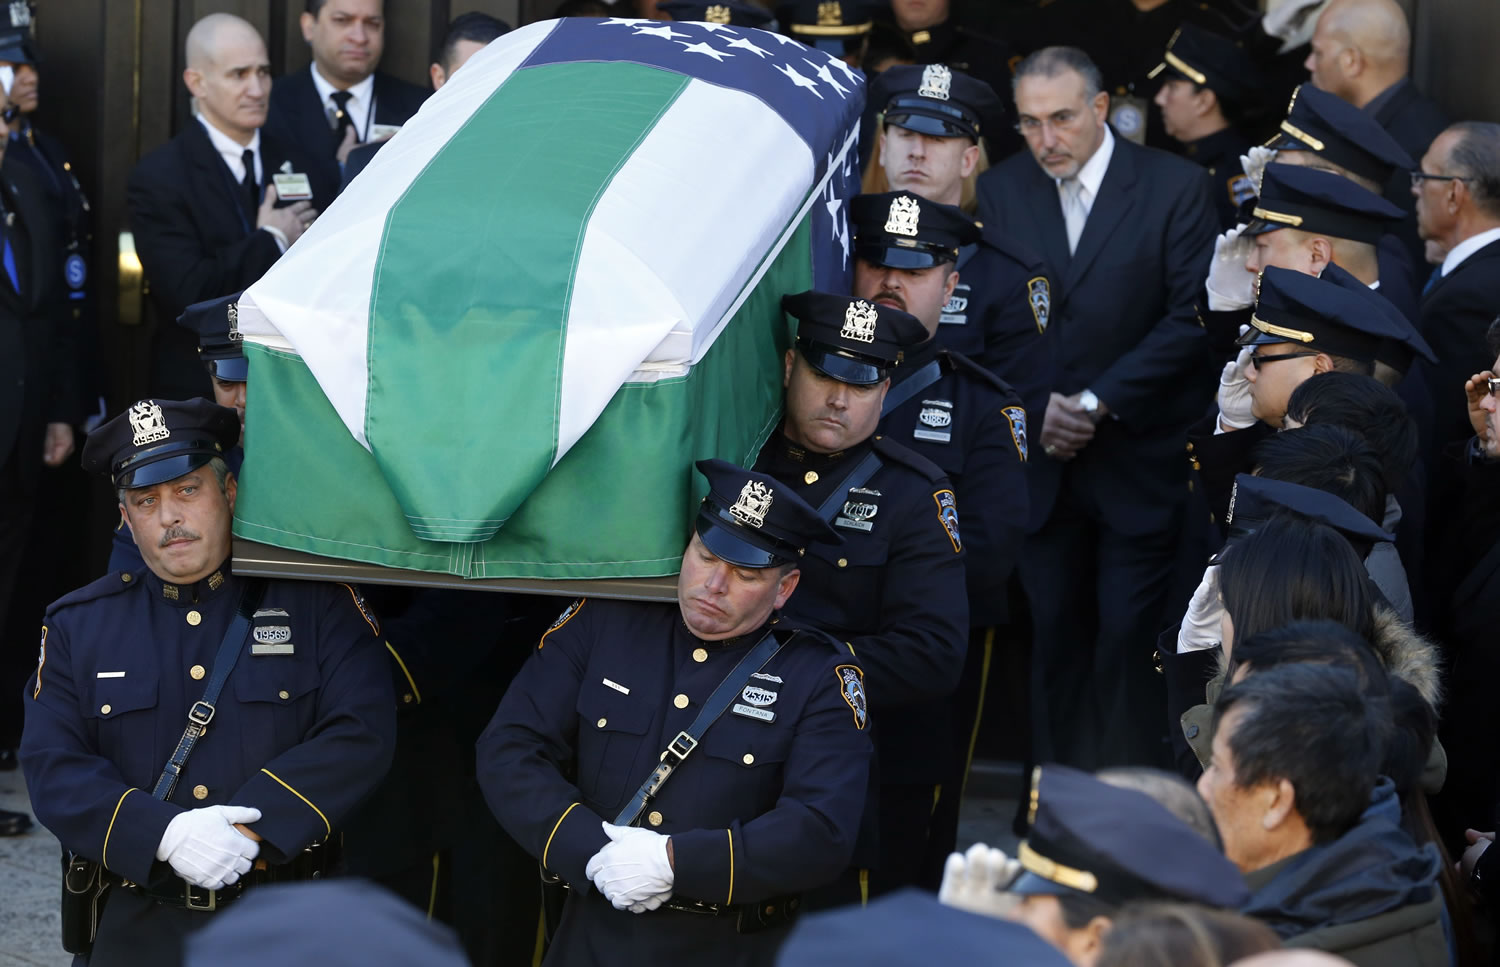 Pallbearers carry the casket of New York City police officer Rafael Ramos following funeral services at Christ Tabernacle Church, in the Glendale section of Queens, Saturday, Dec. 27, 2014, in New York. Ramos and his partner, officer Wenjian Liu, were killed Dec. 20 as they sat in their patrol car on a Brooklyn street. The shooter, Ismaaiyl Brinsley, later killed himself.